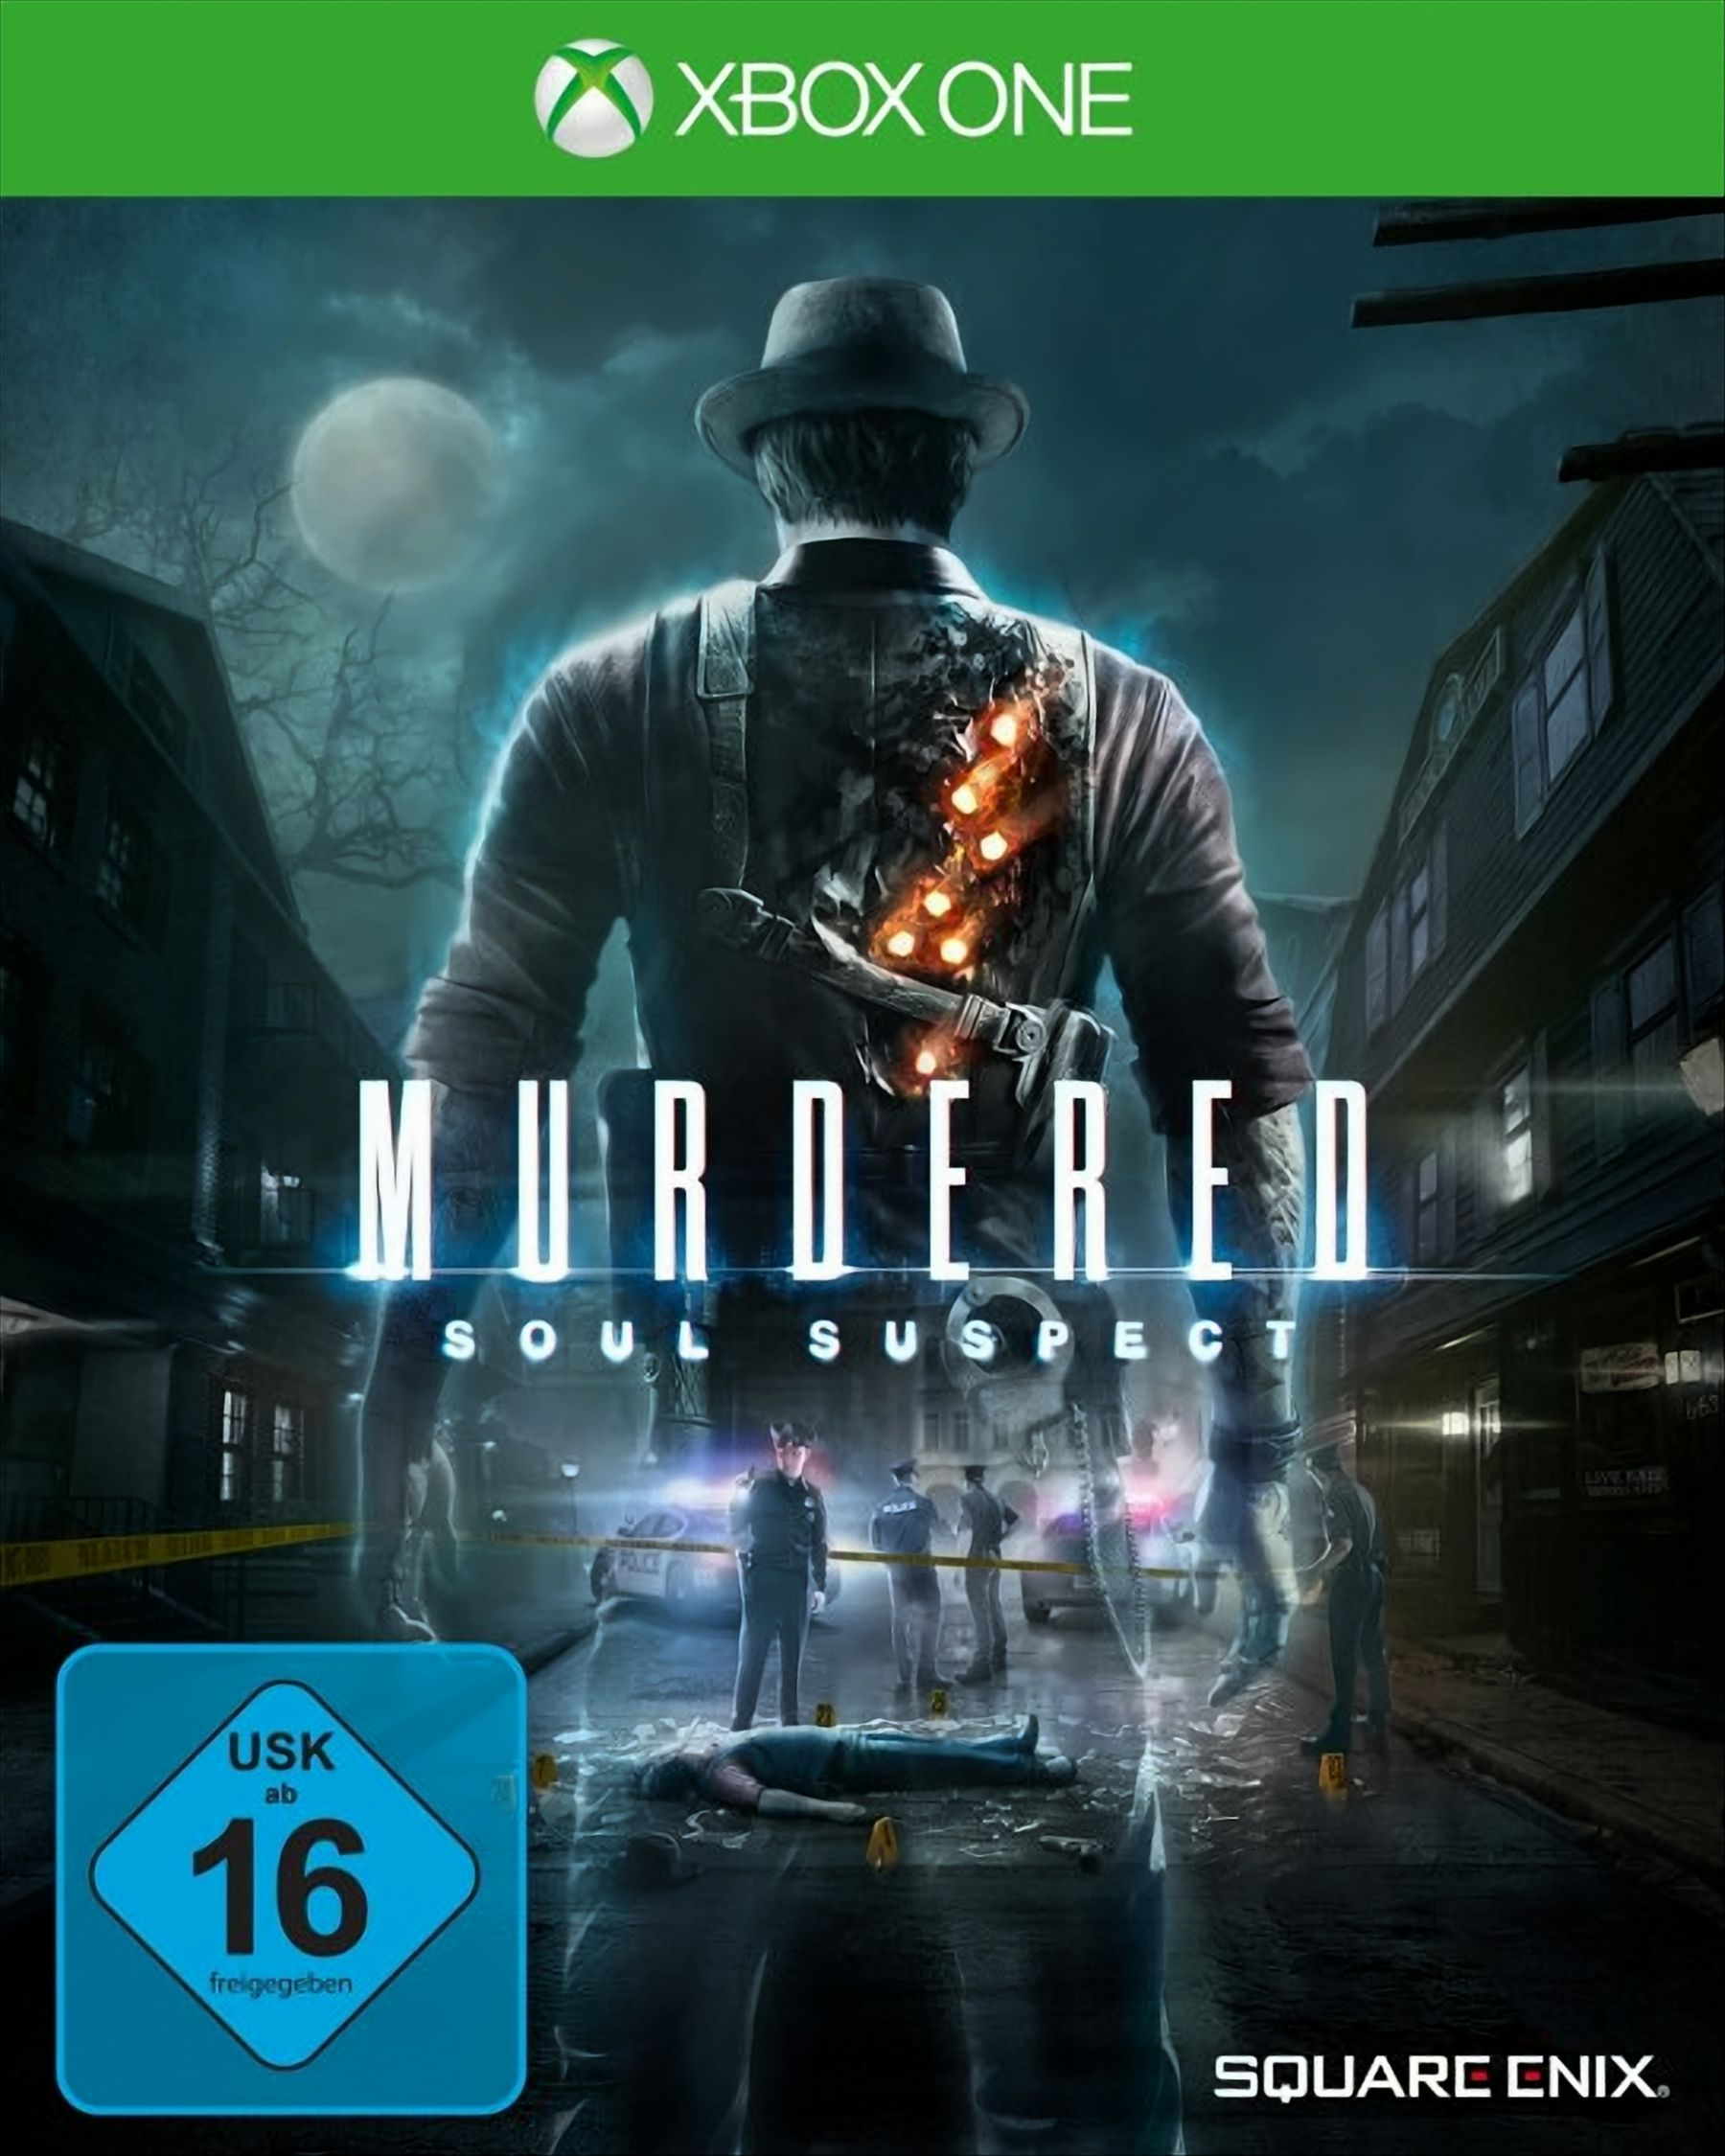 [Xbox One] Suspect Soul Murdered: -